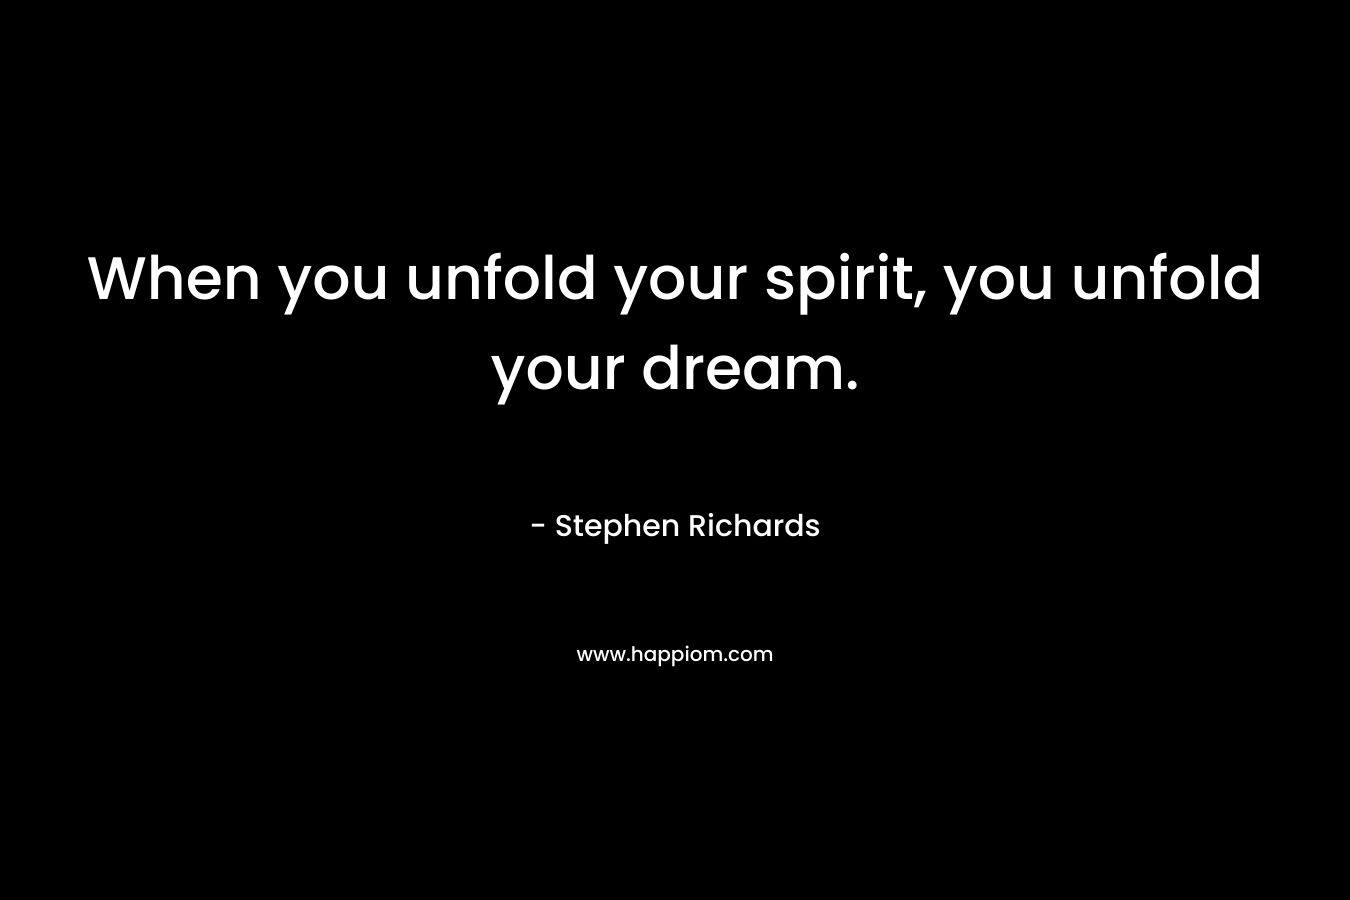 When you unfold your spirit, you unfold your dream.